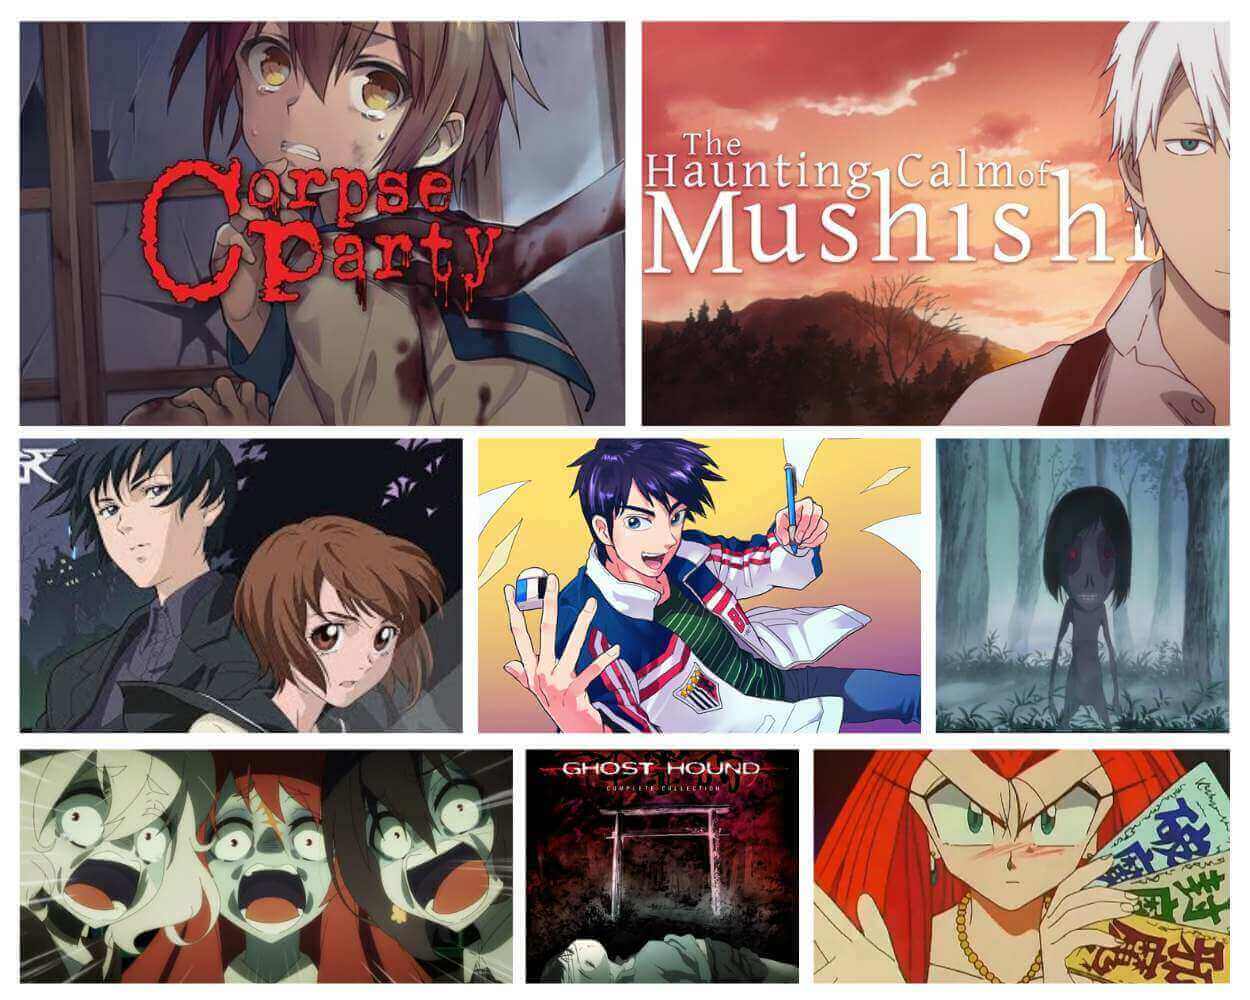 Anime Shows about ghosts, the paranormal & the supernatural